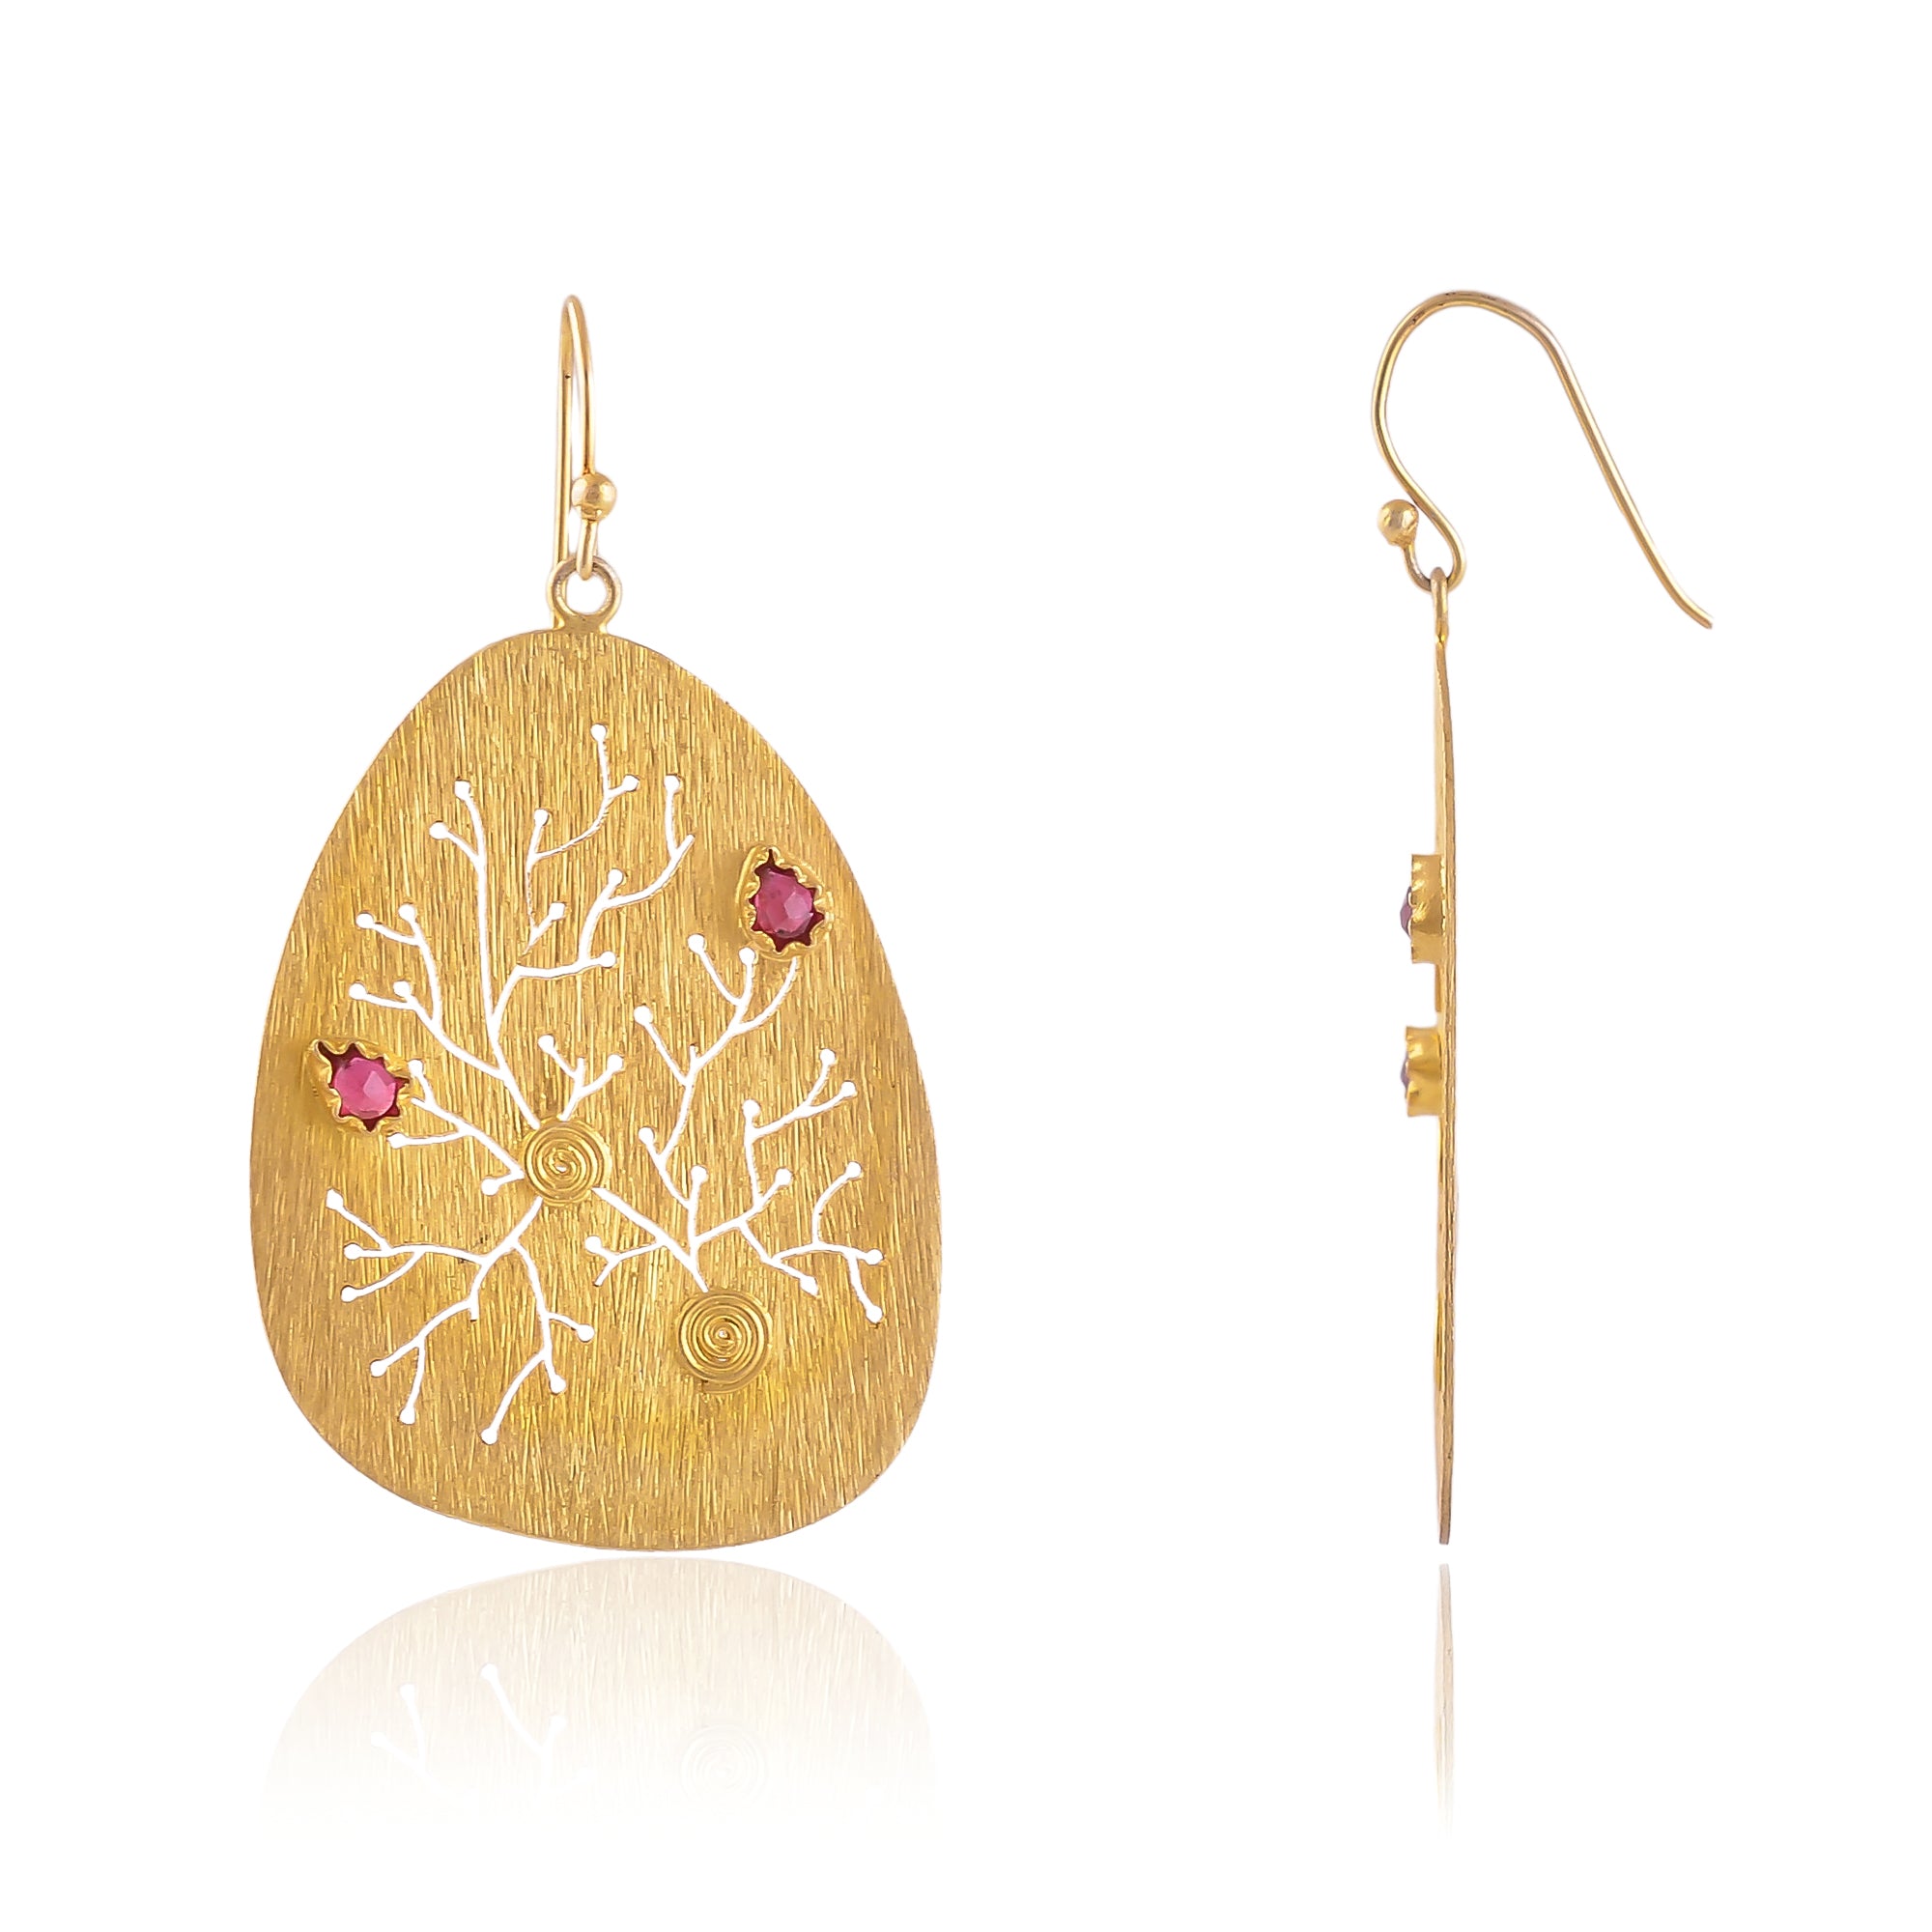 Buy Hand Crafted Silver Gold Plated Ruby Earring